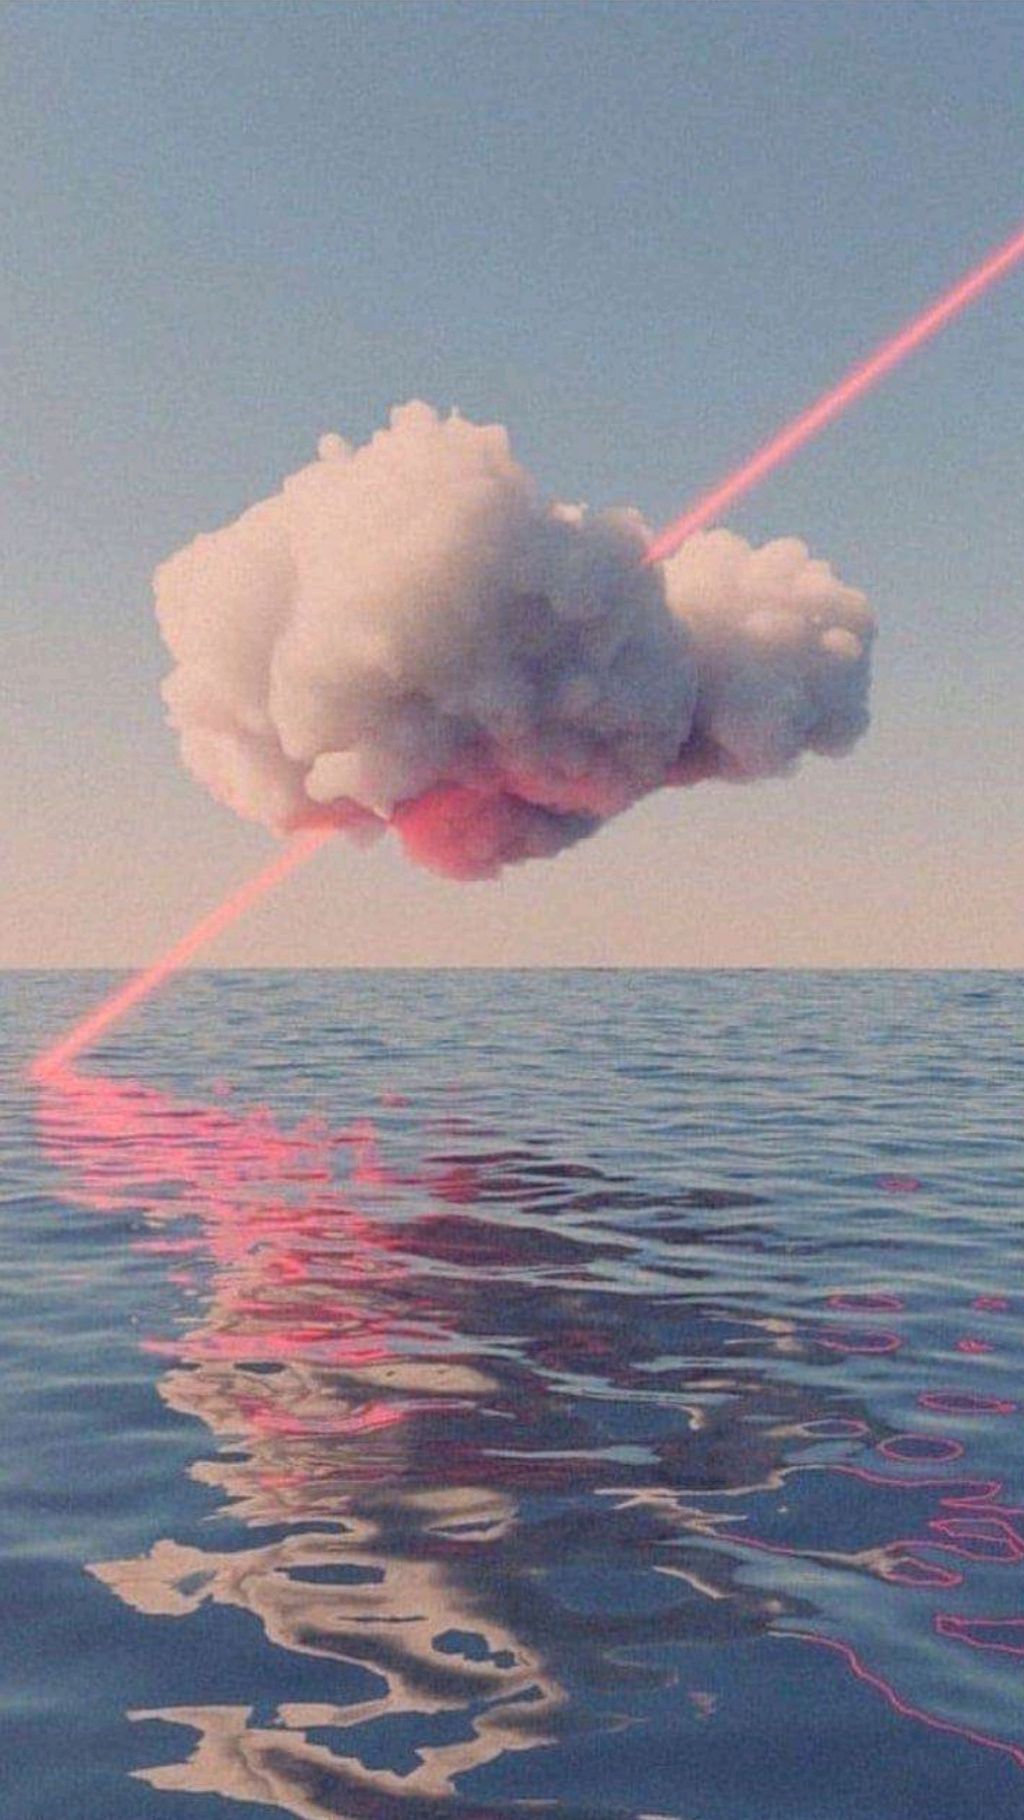 A cloud with red laser beam in the sky - Vaporwave, wave, calming